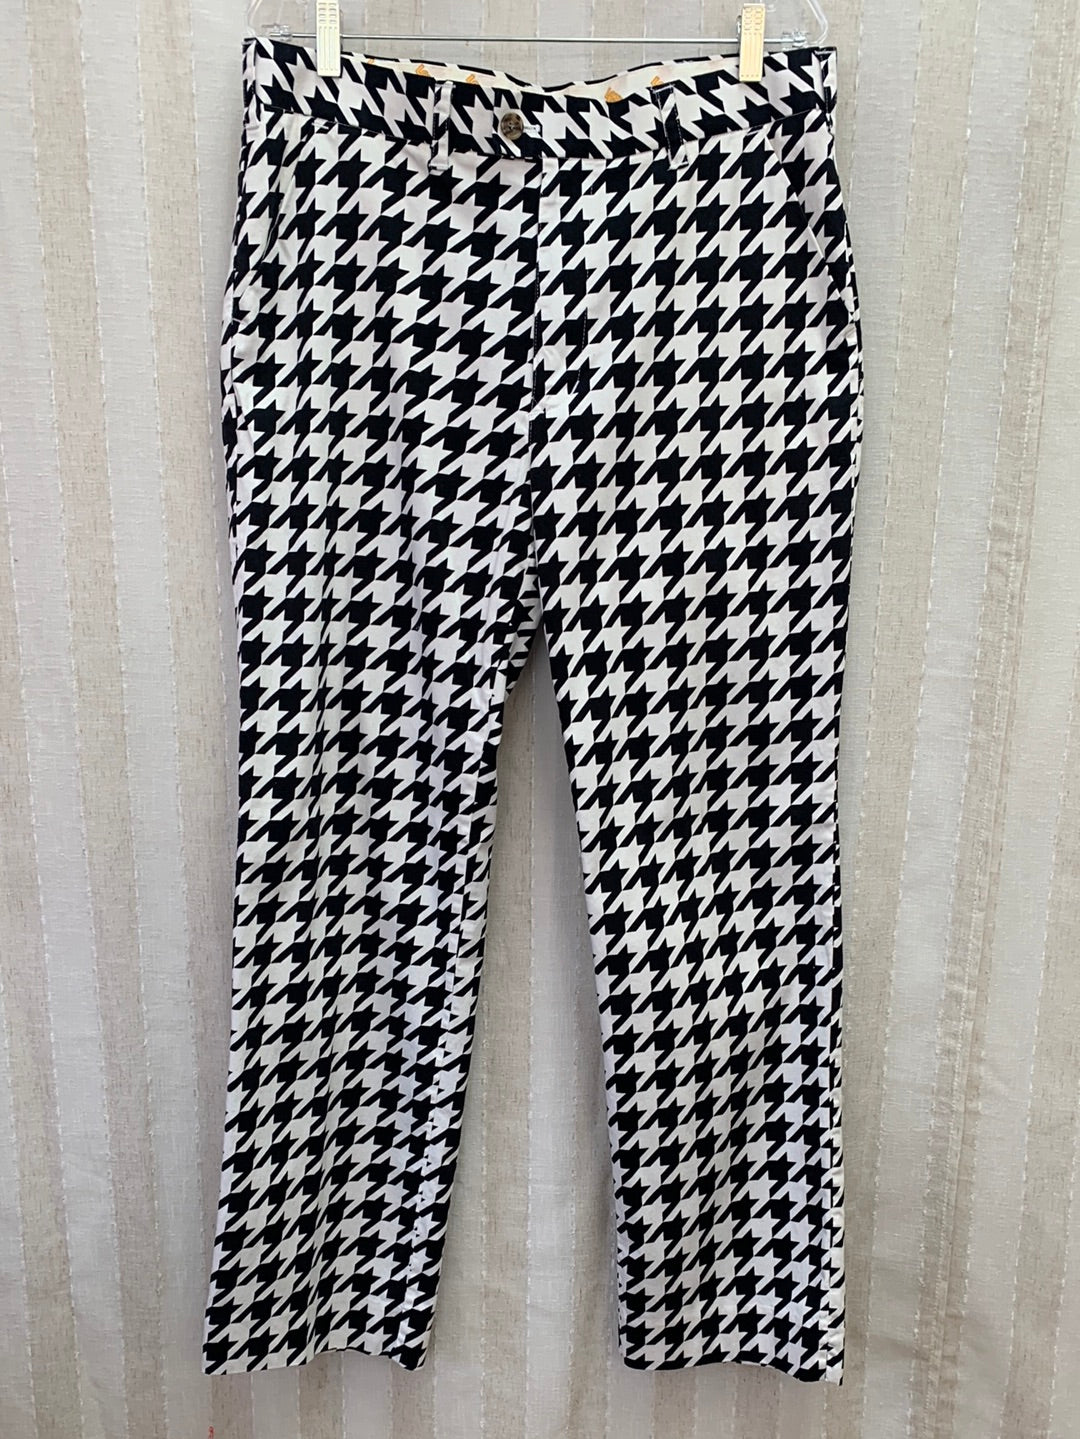 LOUDMOUTH black white houndstooth Cotton Fairway Heritage Pants - 36x32